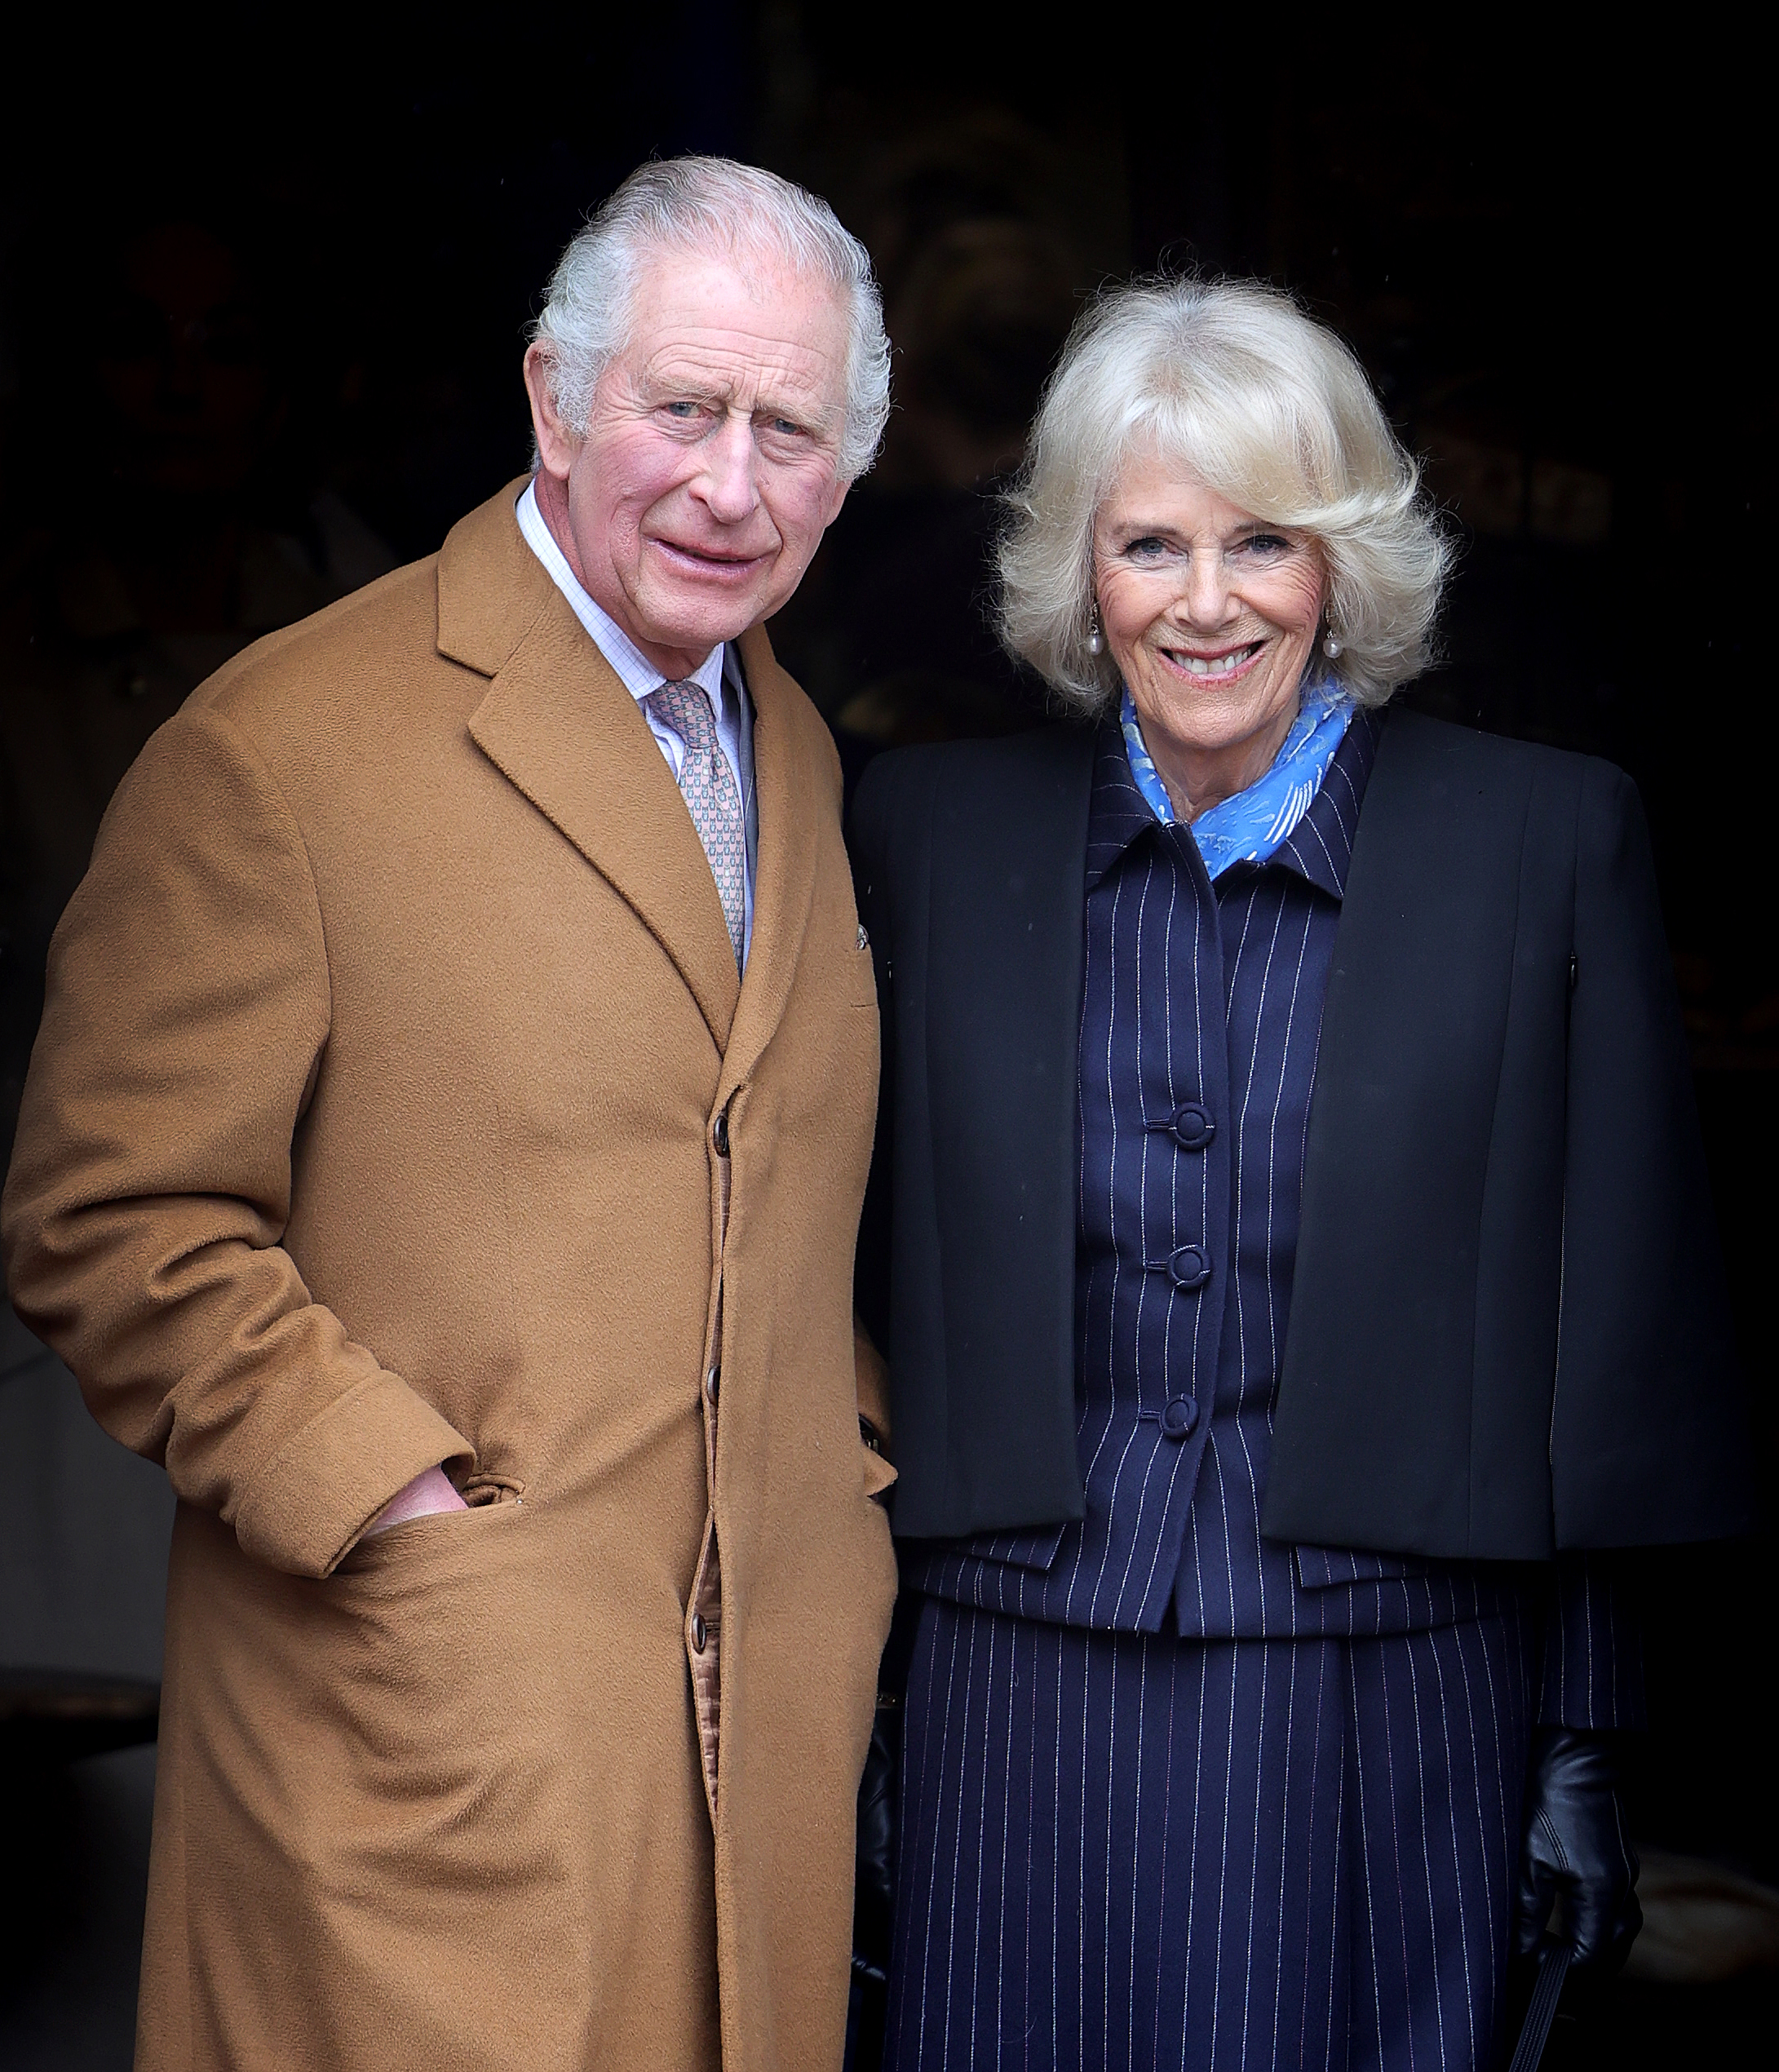 PHOTO: King Charles III and Camilla, Queen Consort visit Talbot Yard Food Court on April 5, 2023 in Malton, England.